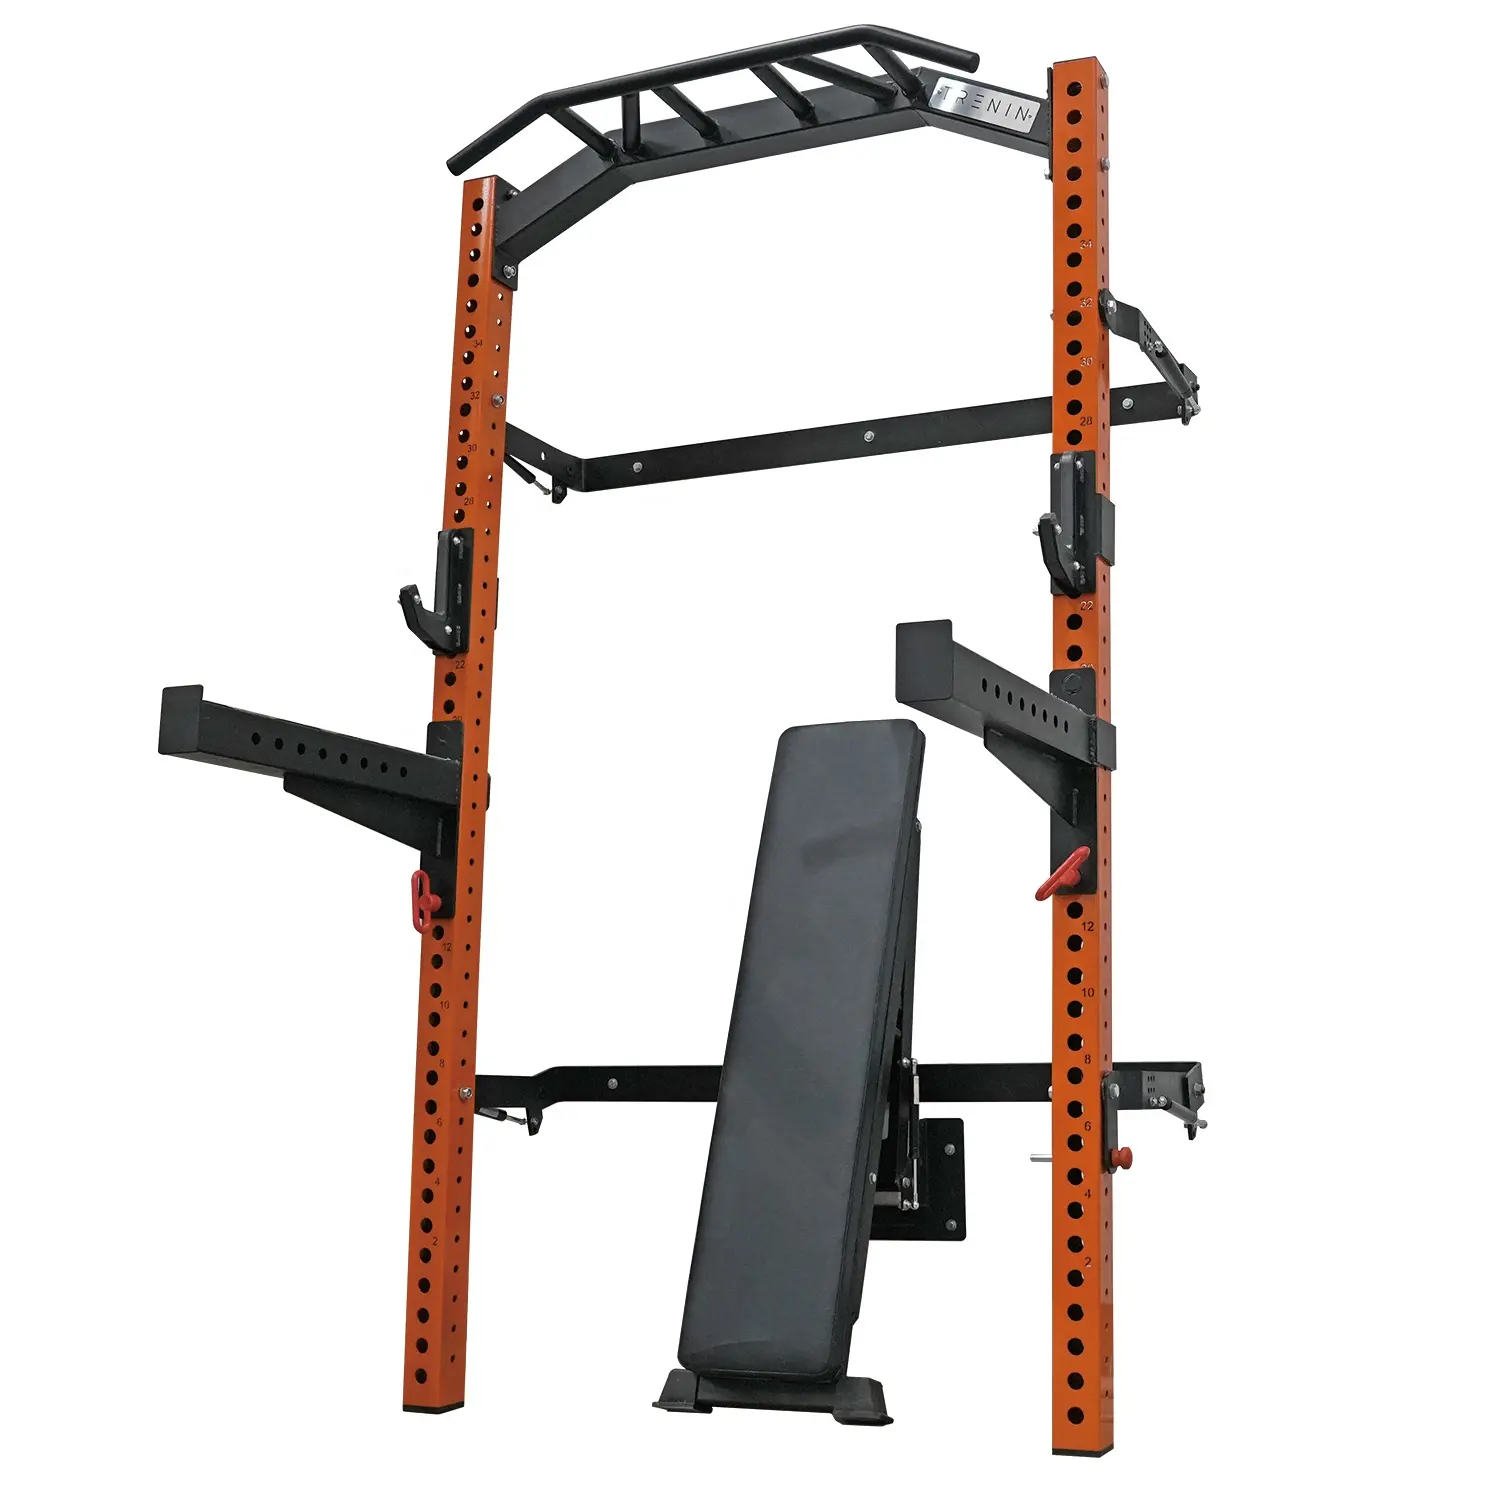 Commercial functional gym and home use fitness equipment wall mounted folding power squat rack with multi-grip bar